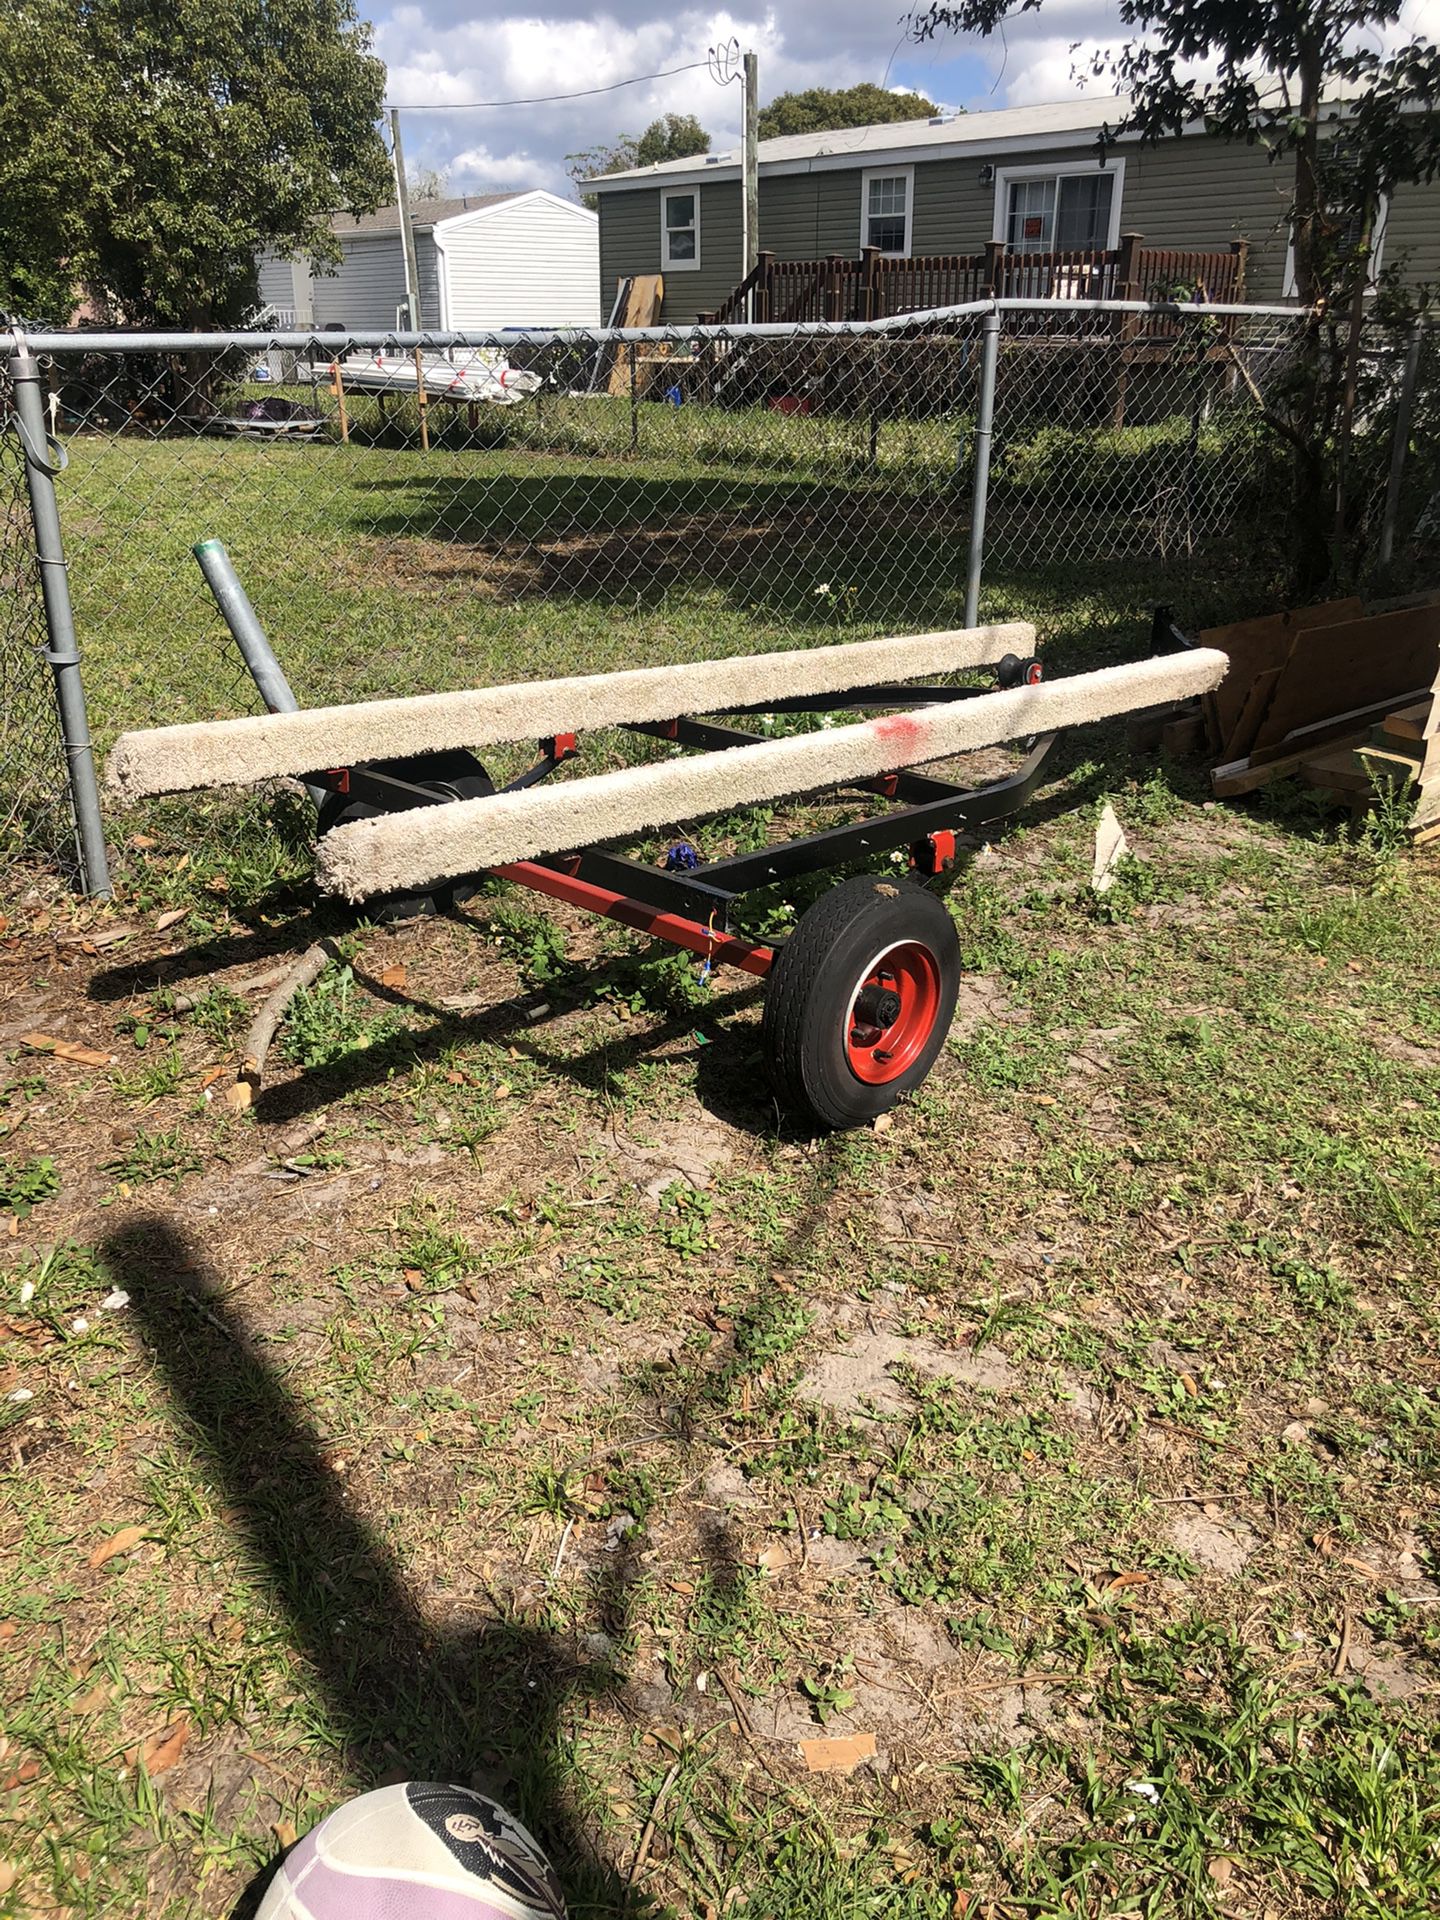 Jesky trailer for sale no title $250 cash or best offer as is